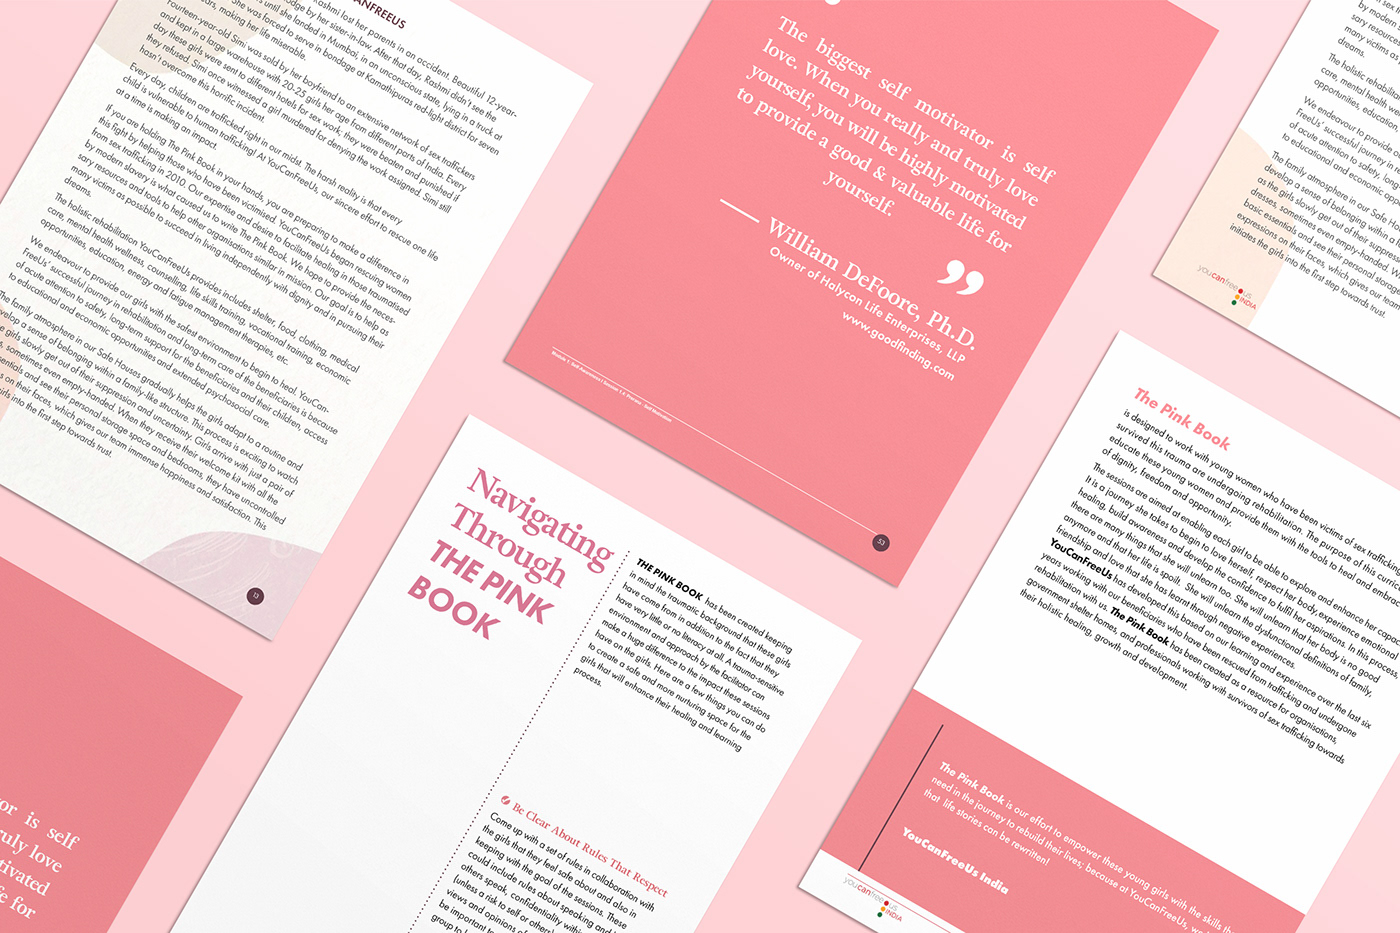 book print InDesign Layout editorial design  book cover healing psychology women empowerment humanity